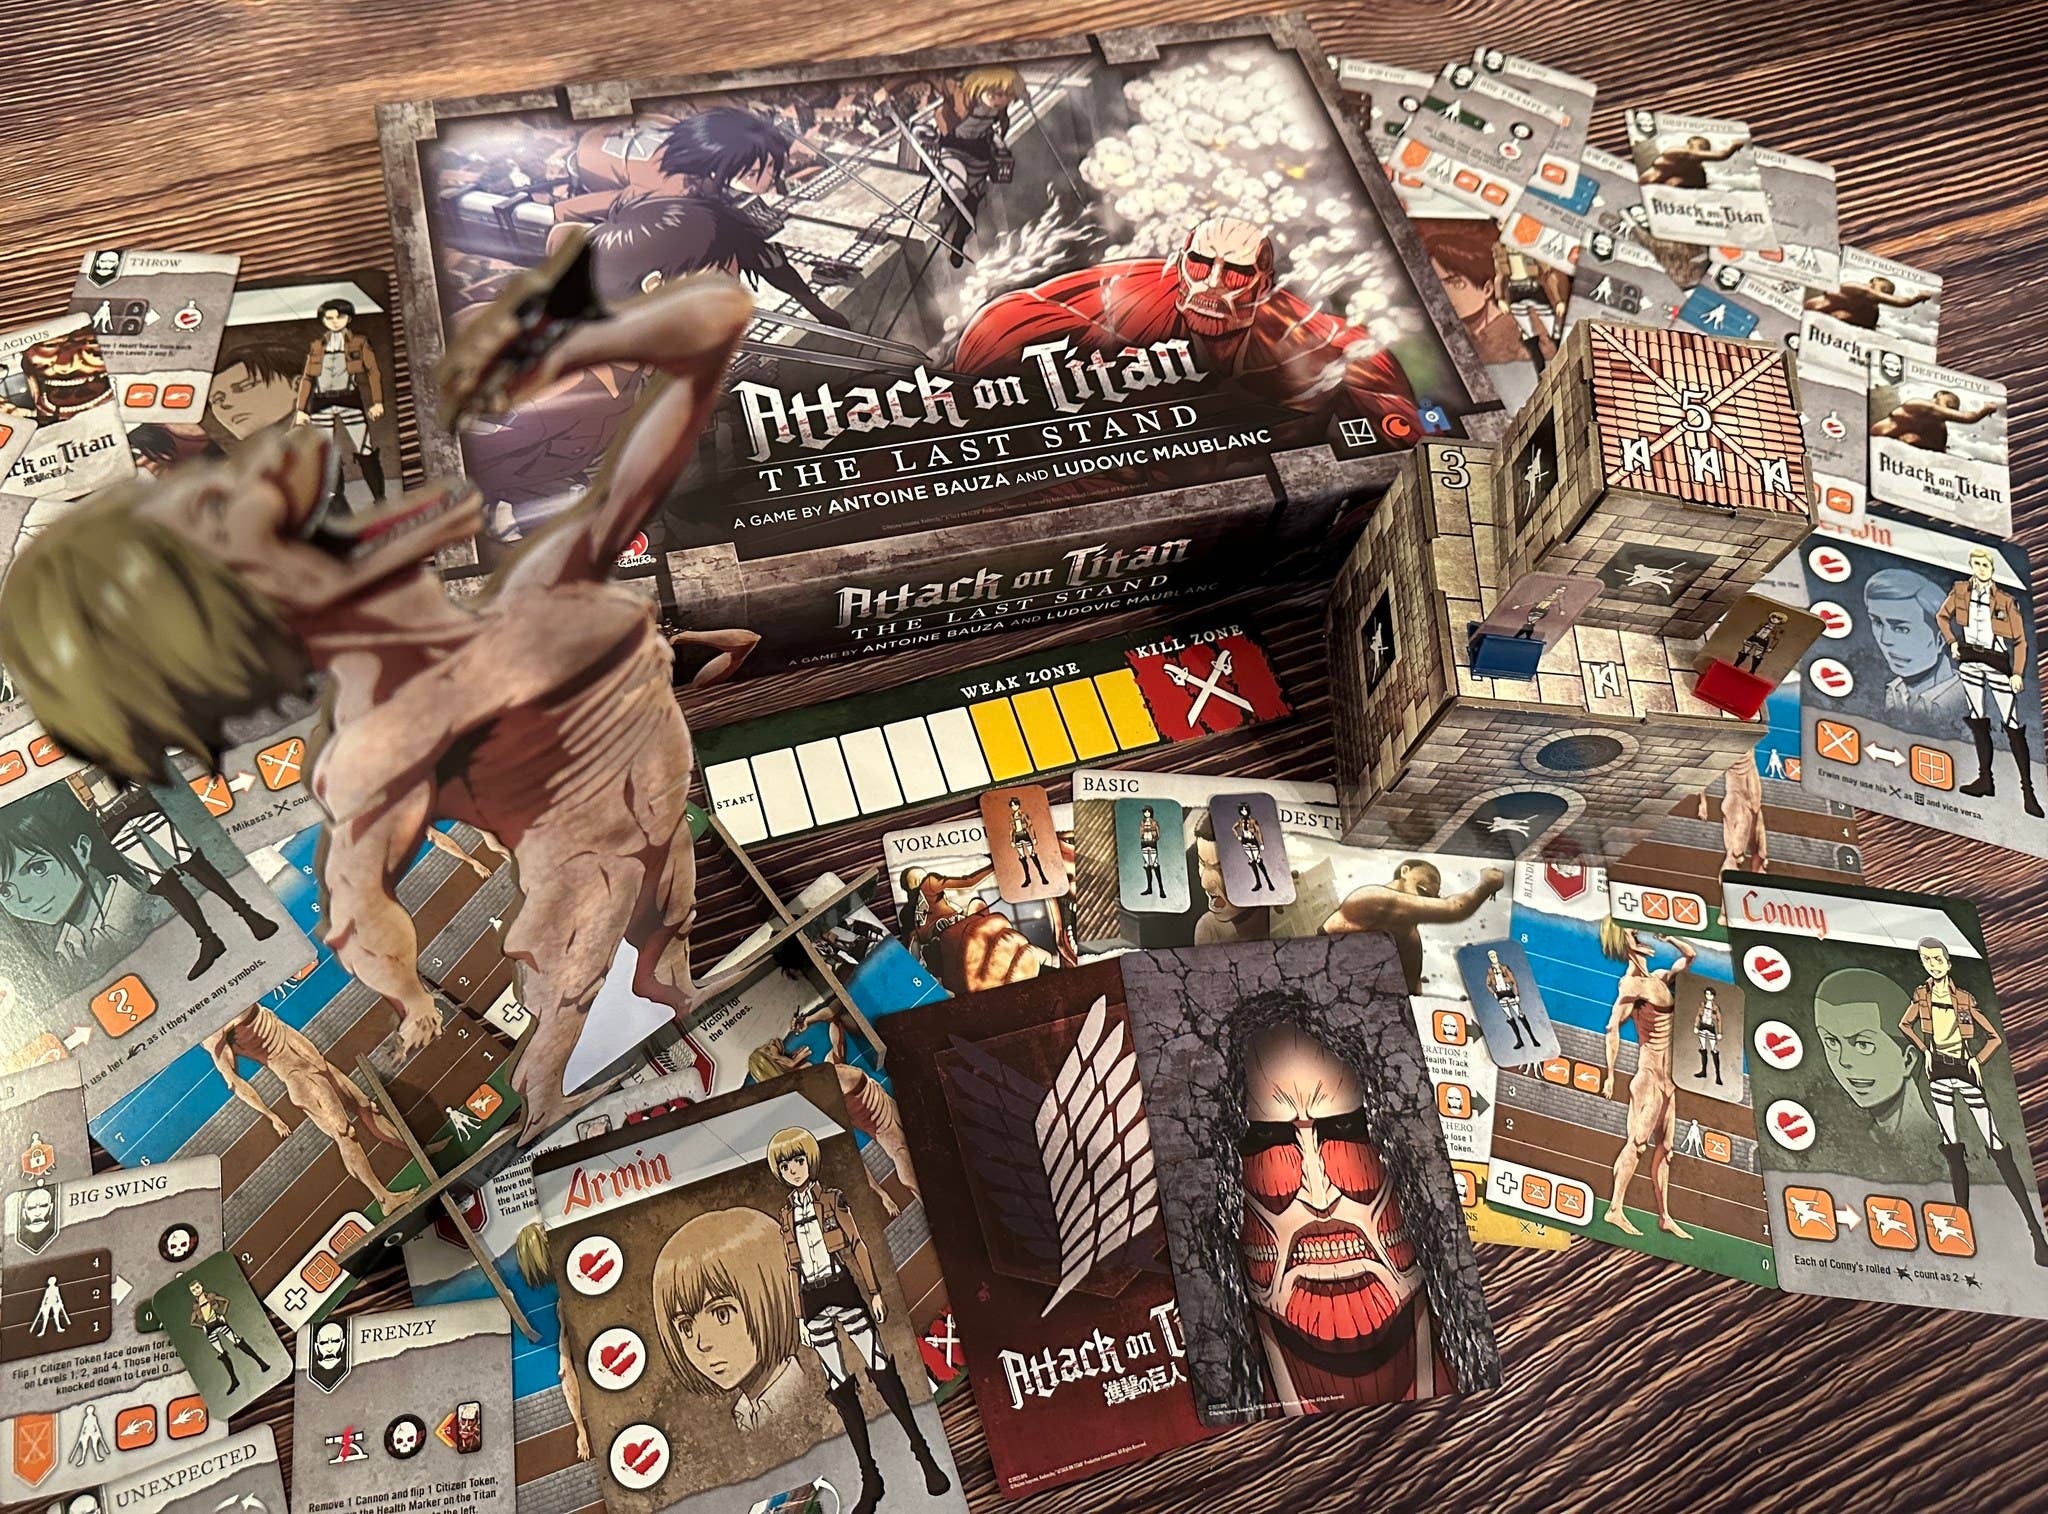 Attack on Titan - The last stand - Japanime Games - Bards & Cards